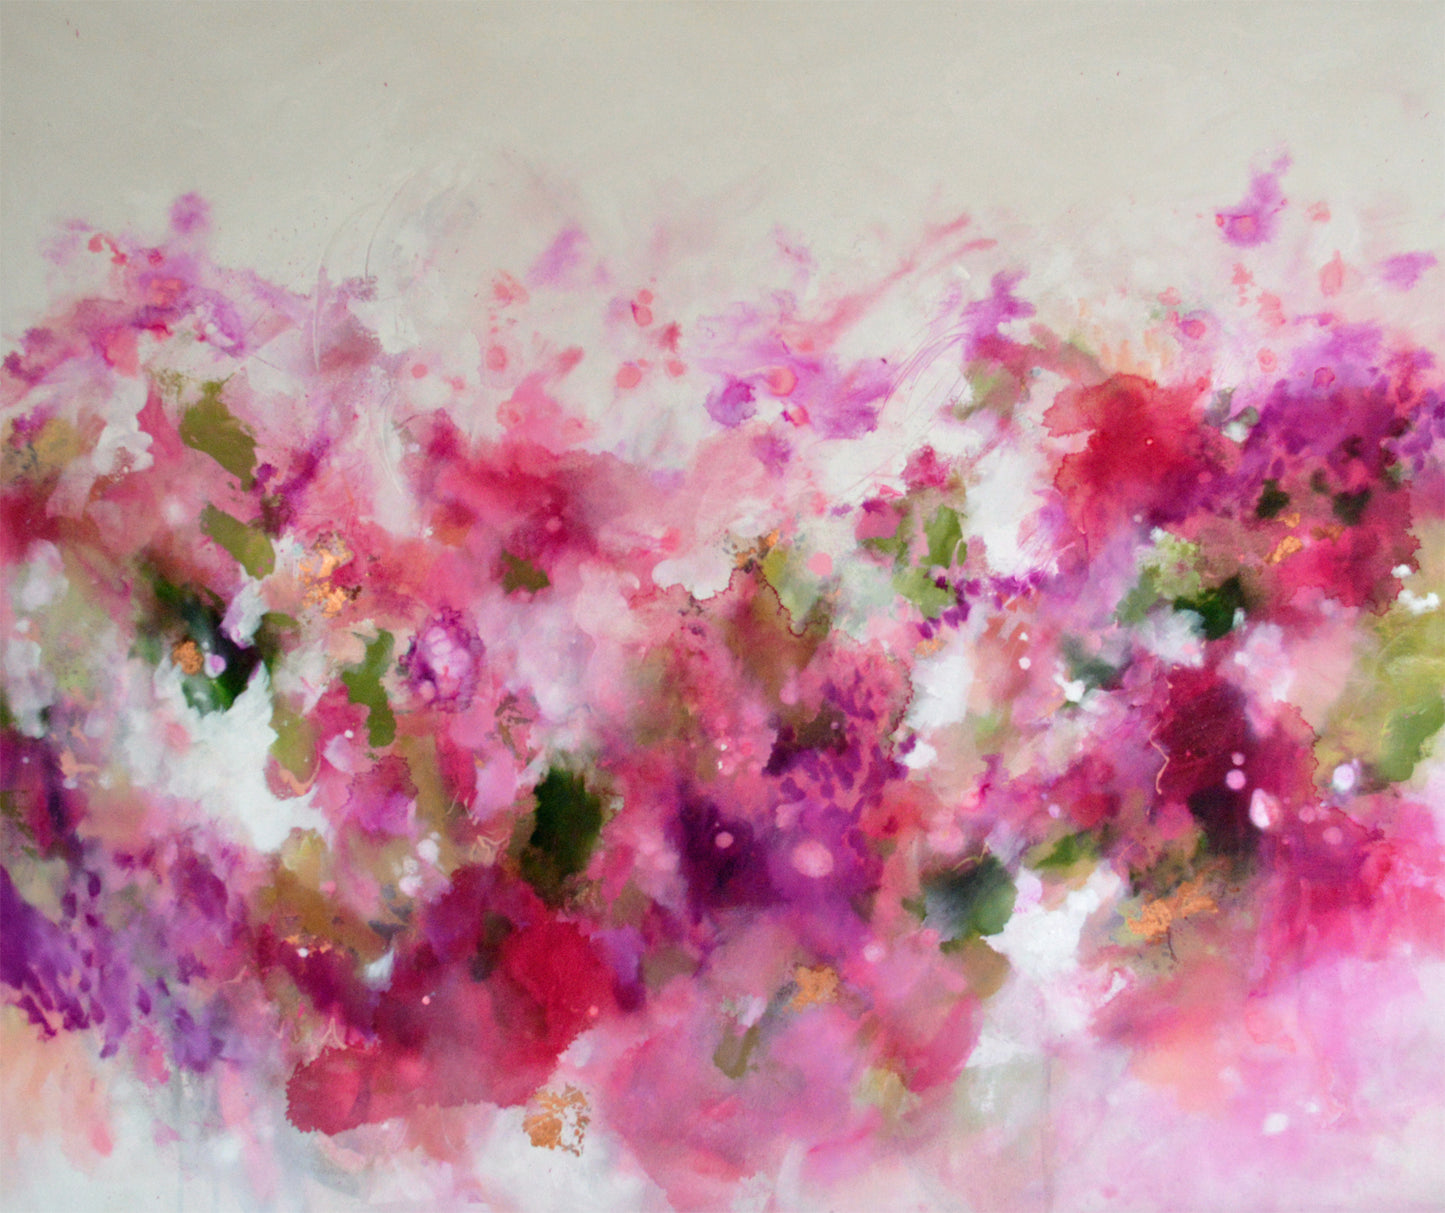 A Certain Smile - Large Pink Original Abstract Painting